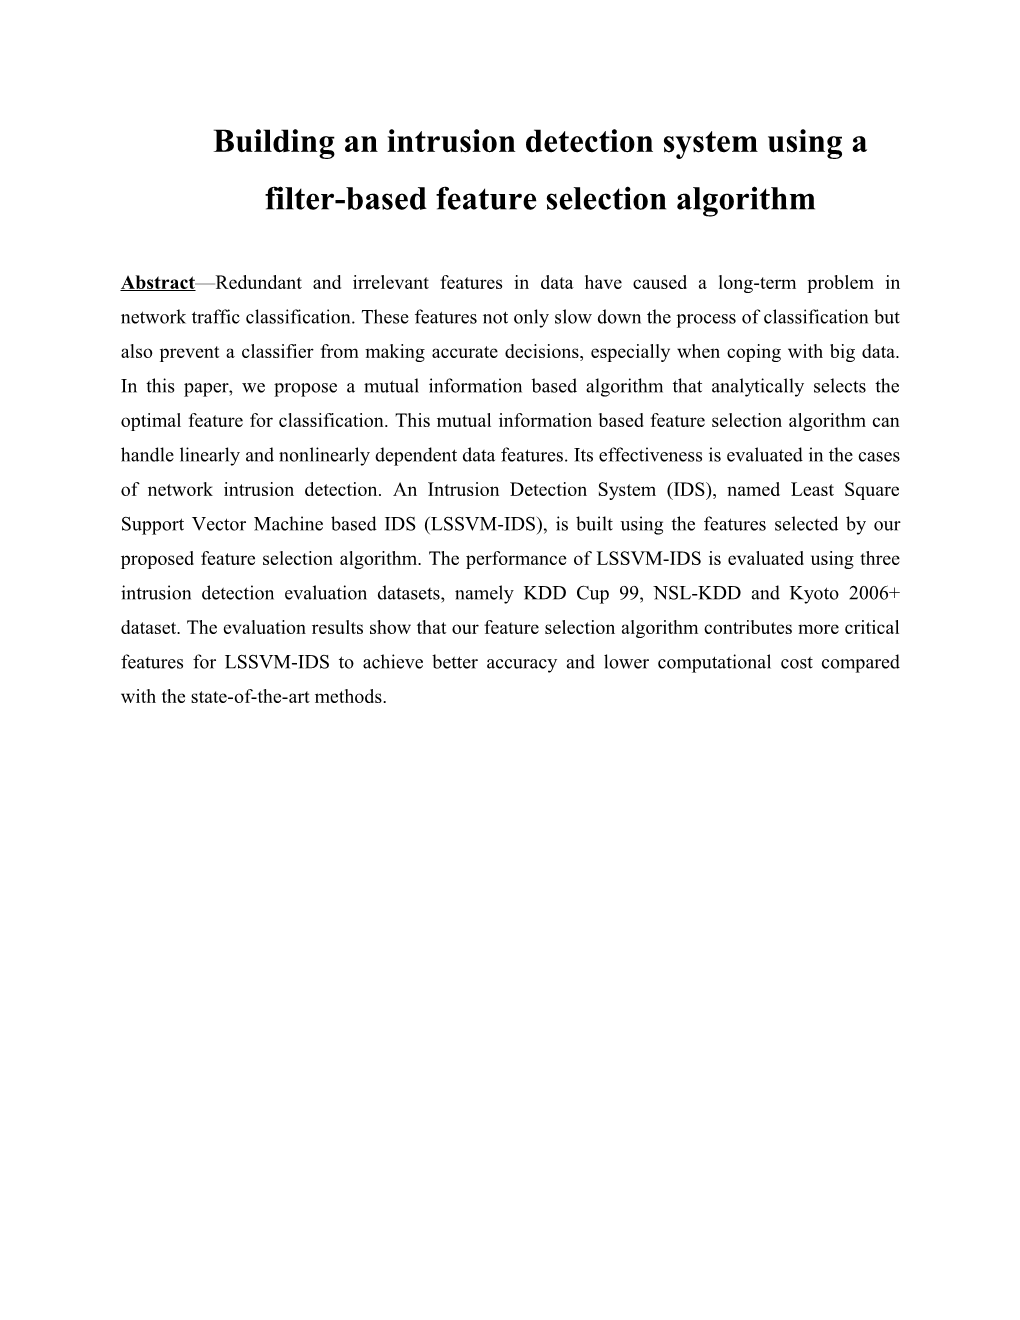 Building an Intrusion Detection System Using a Filter-Based Feature Selection Algorithm